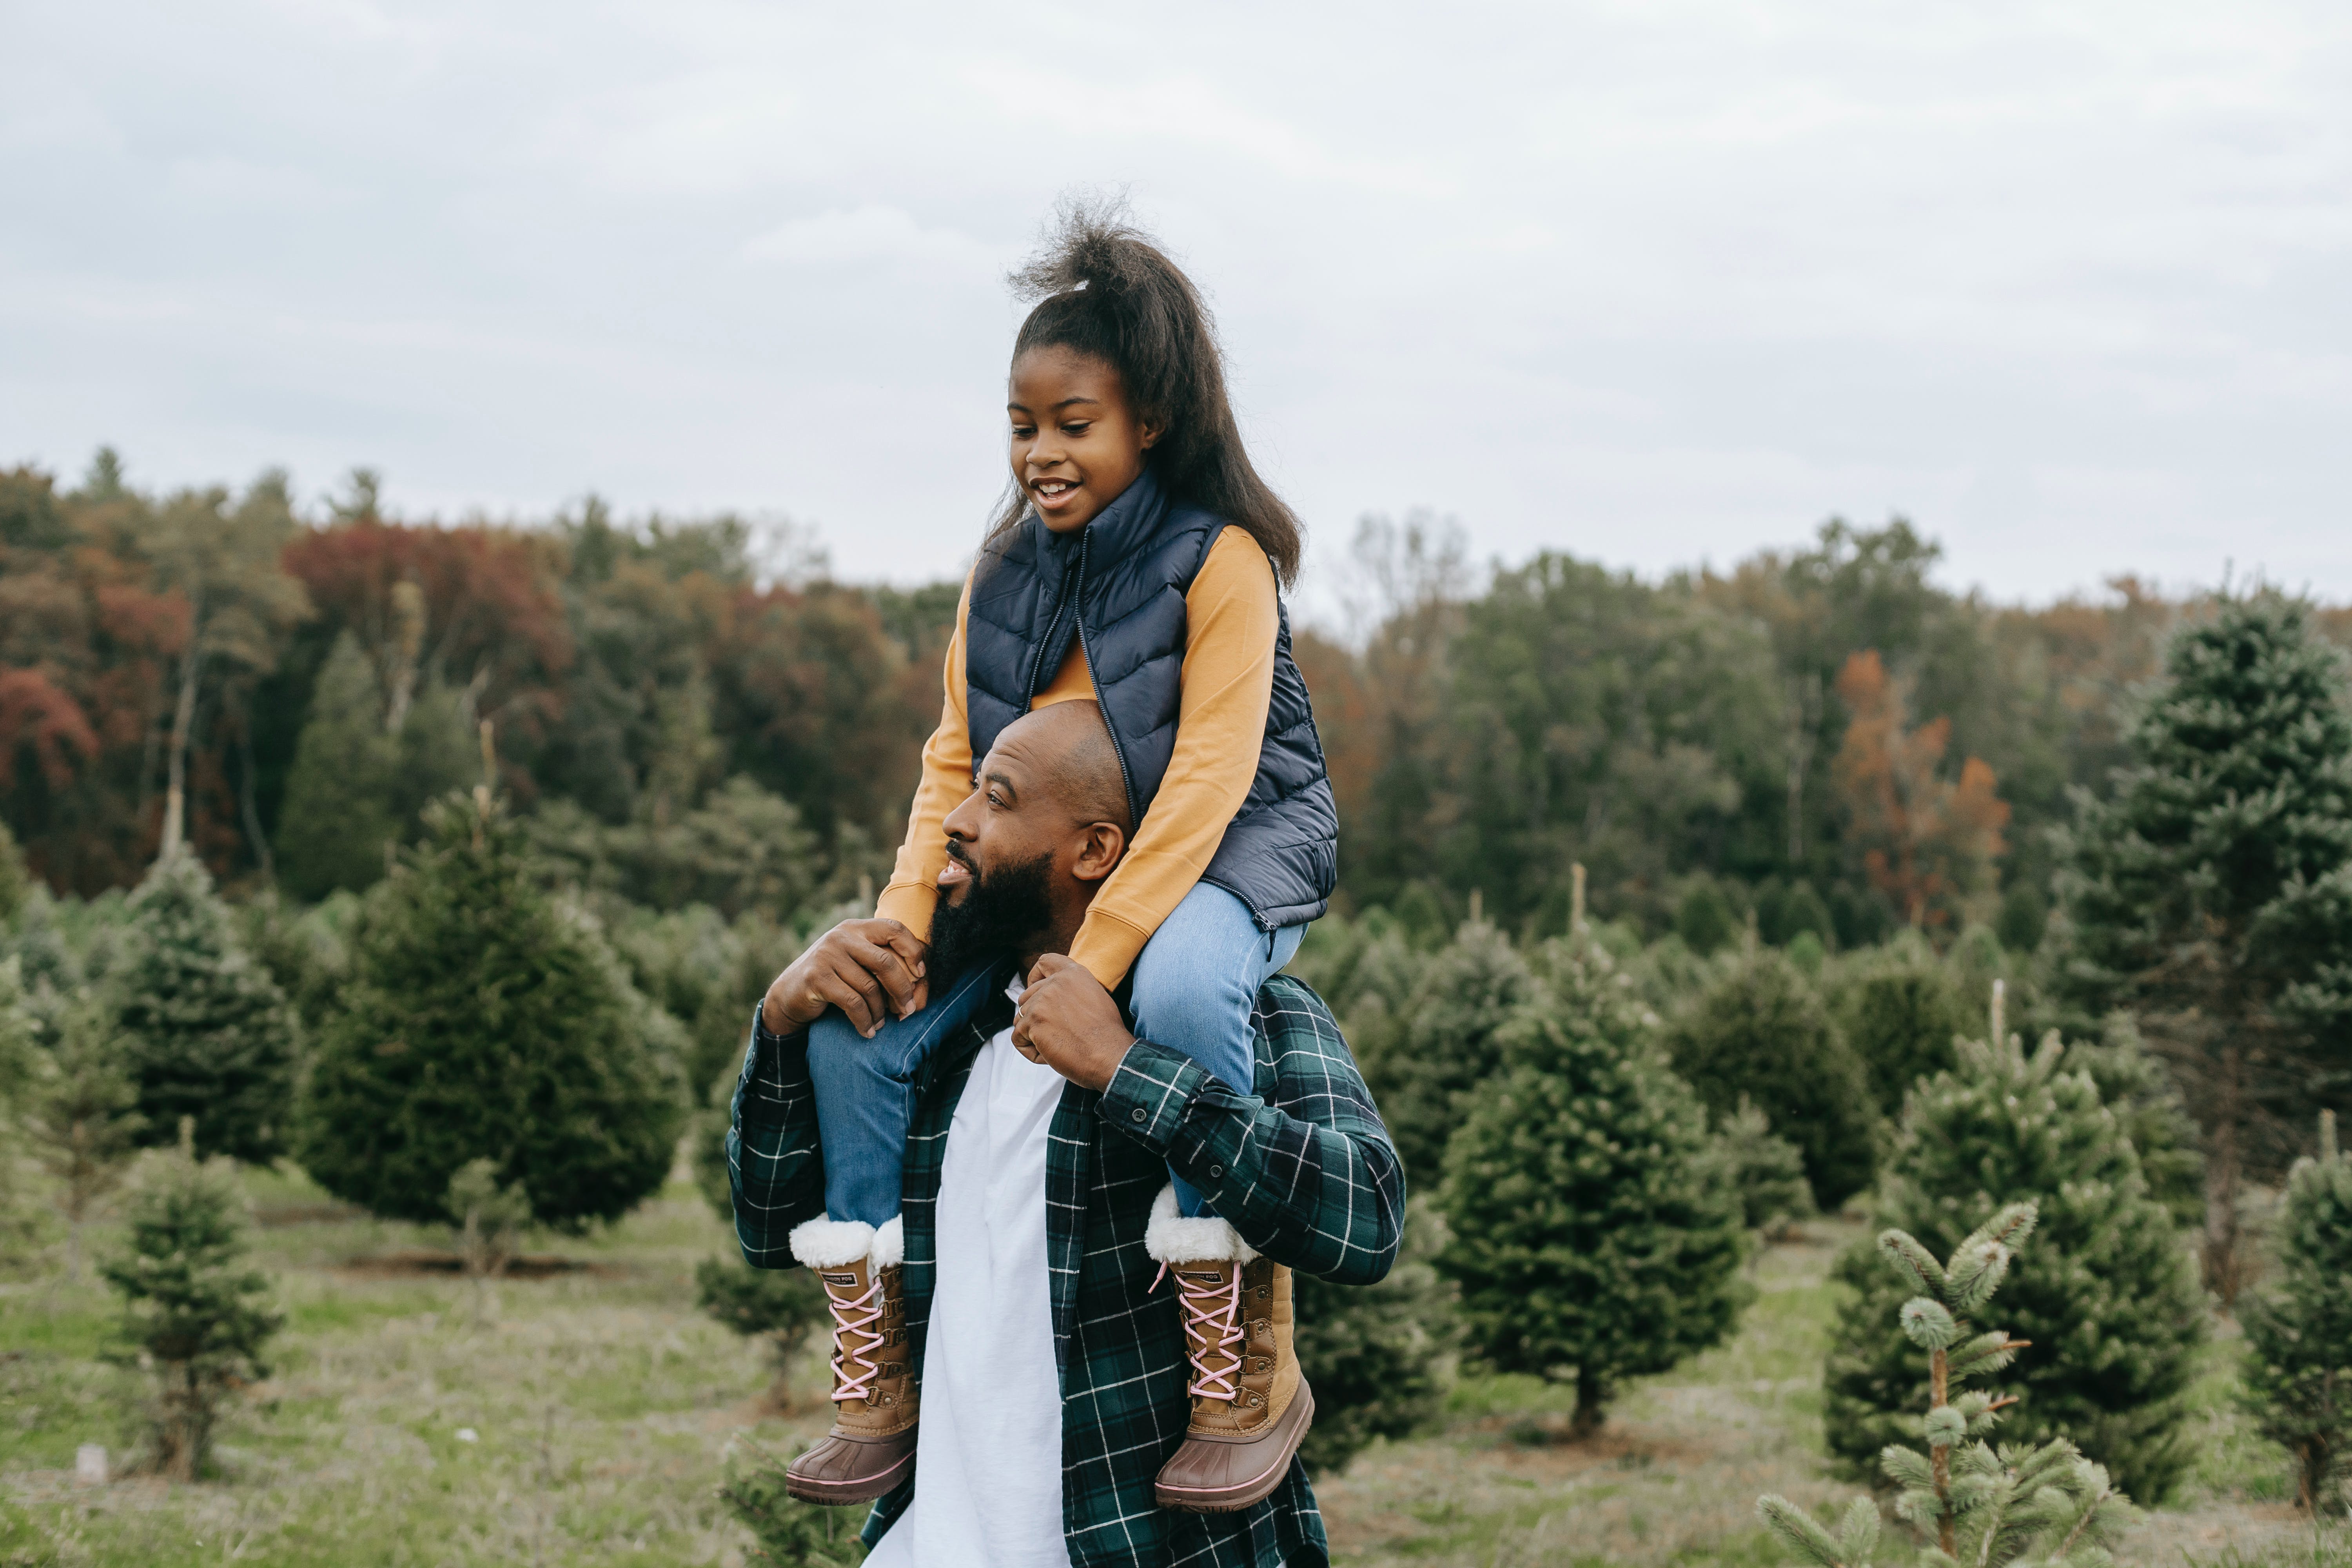 A man carrying his daughter on his shoulders. | Source: Pexels